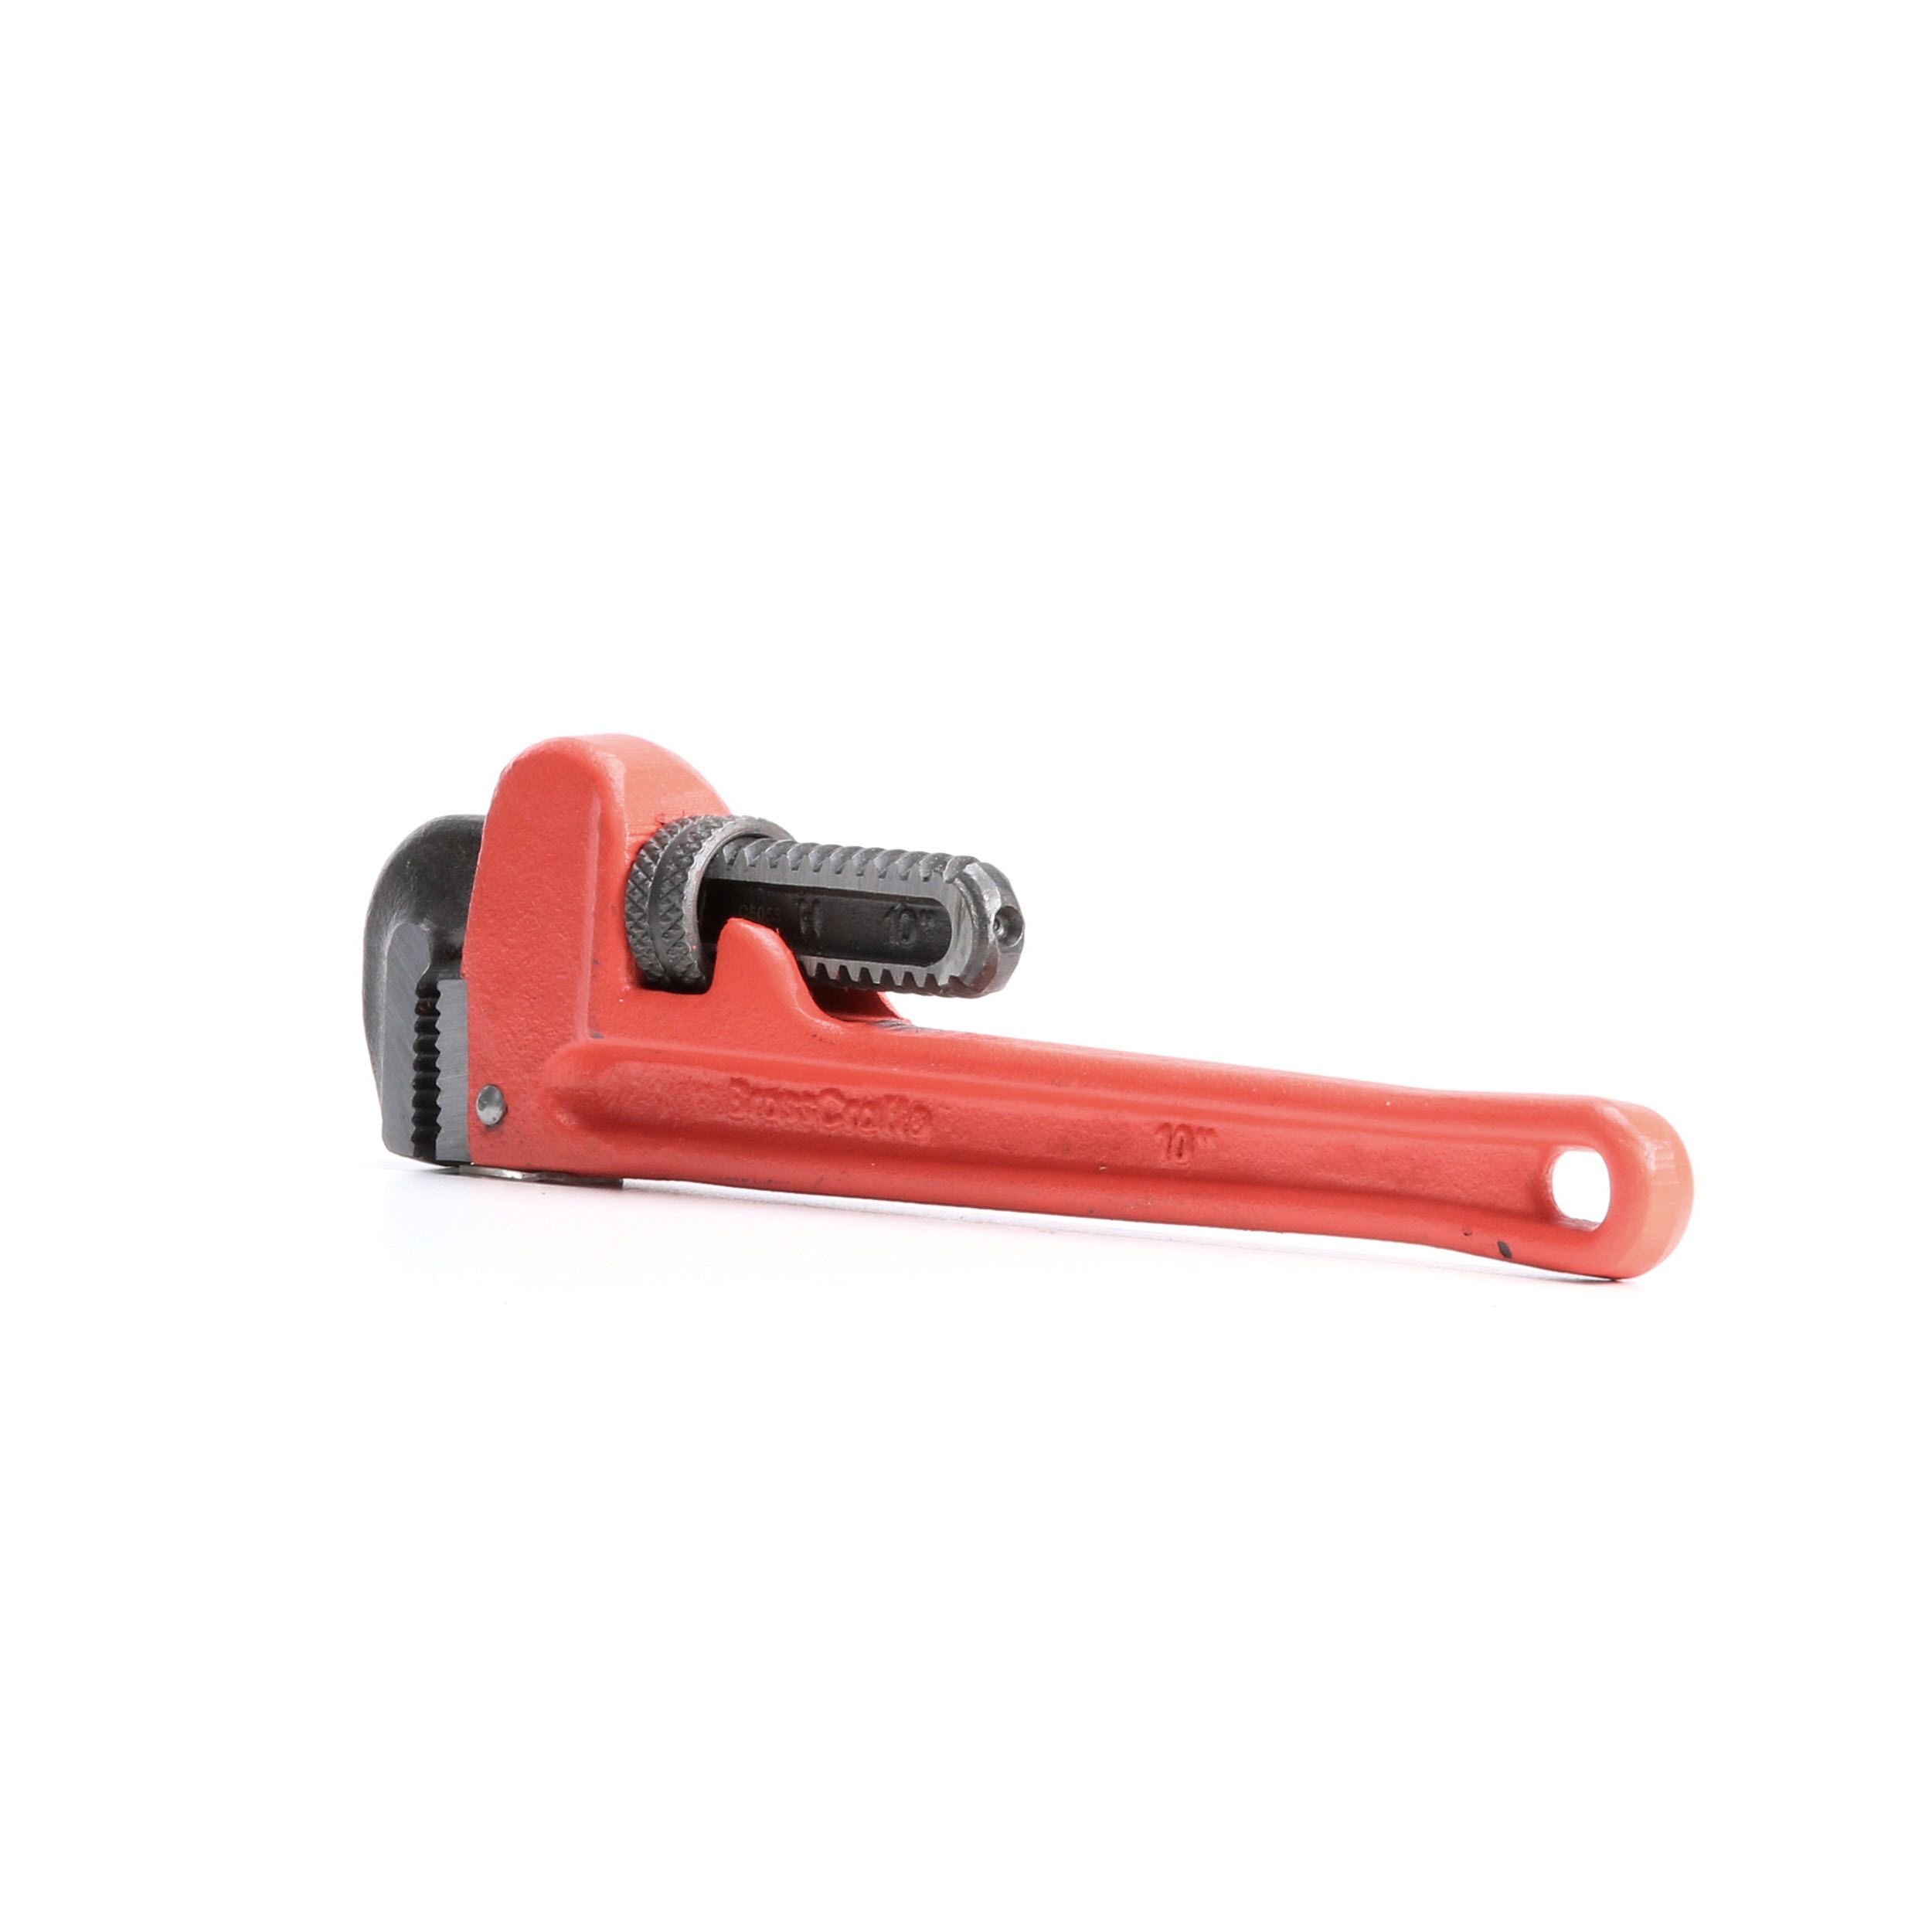 LENOX TOOLS LXHT90714 Cast Iron Pipe Wrench 14 